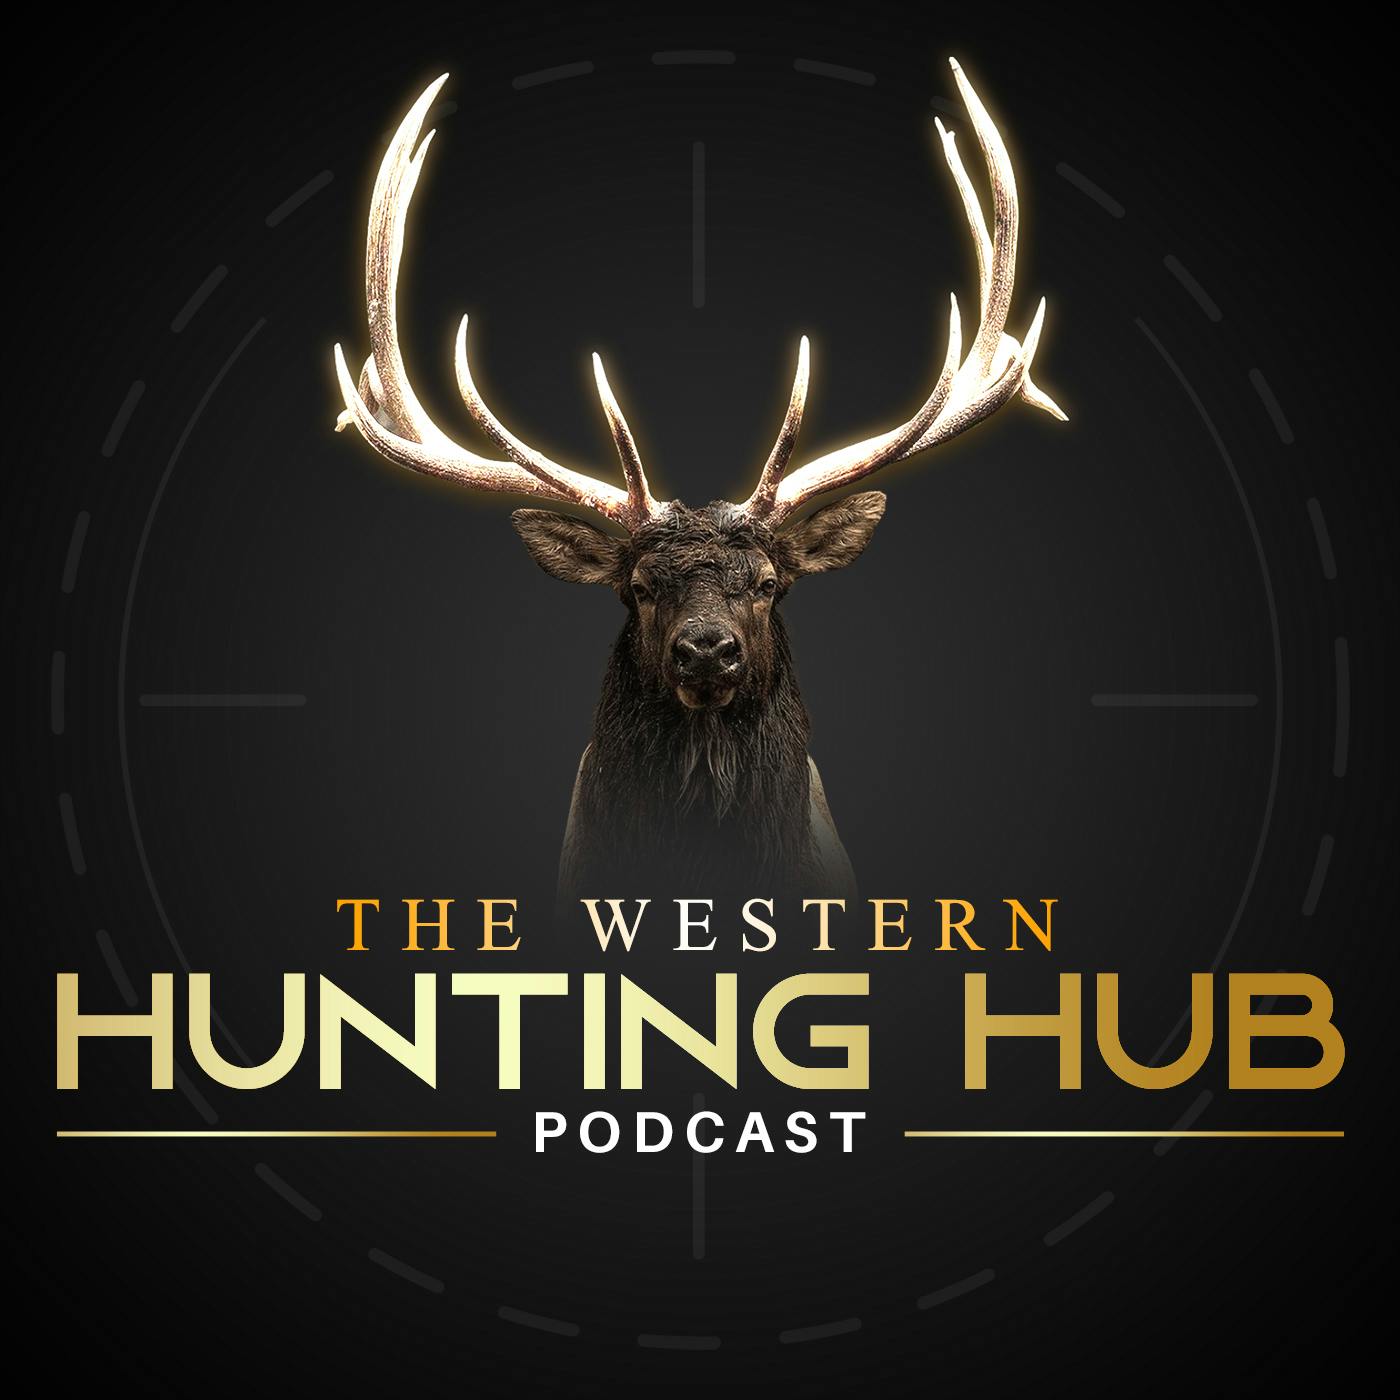 129 - The Best Kind of Hunting Buddies with Collin Cottrell